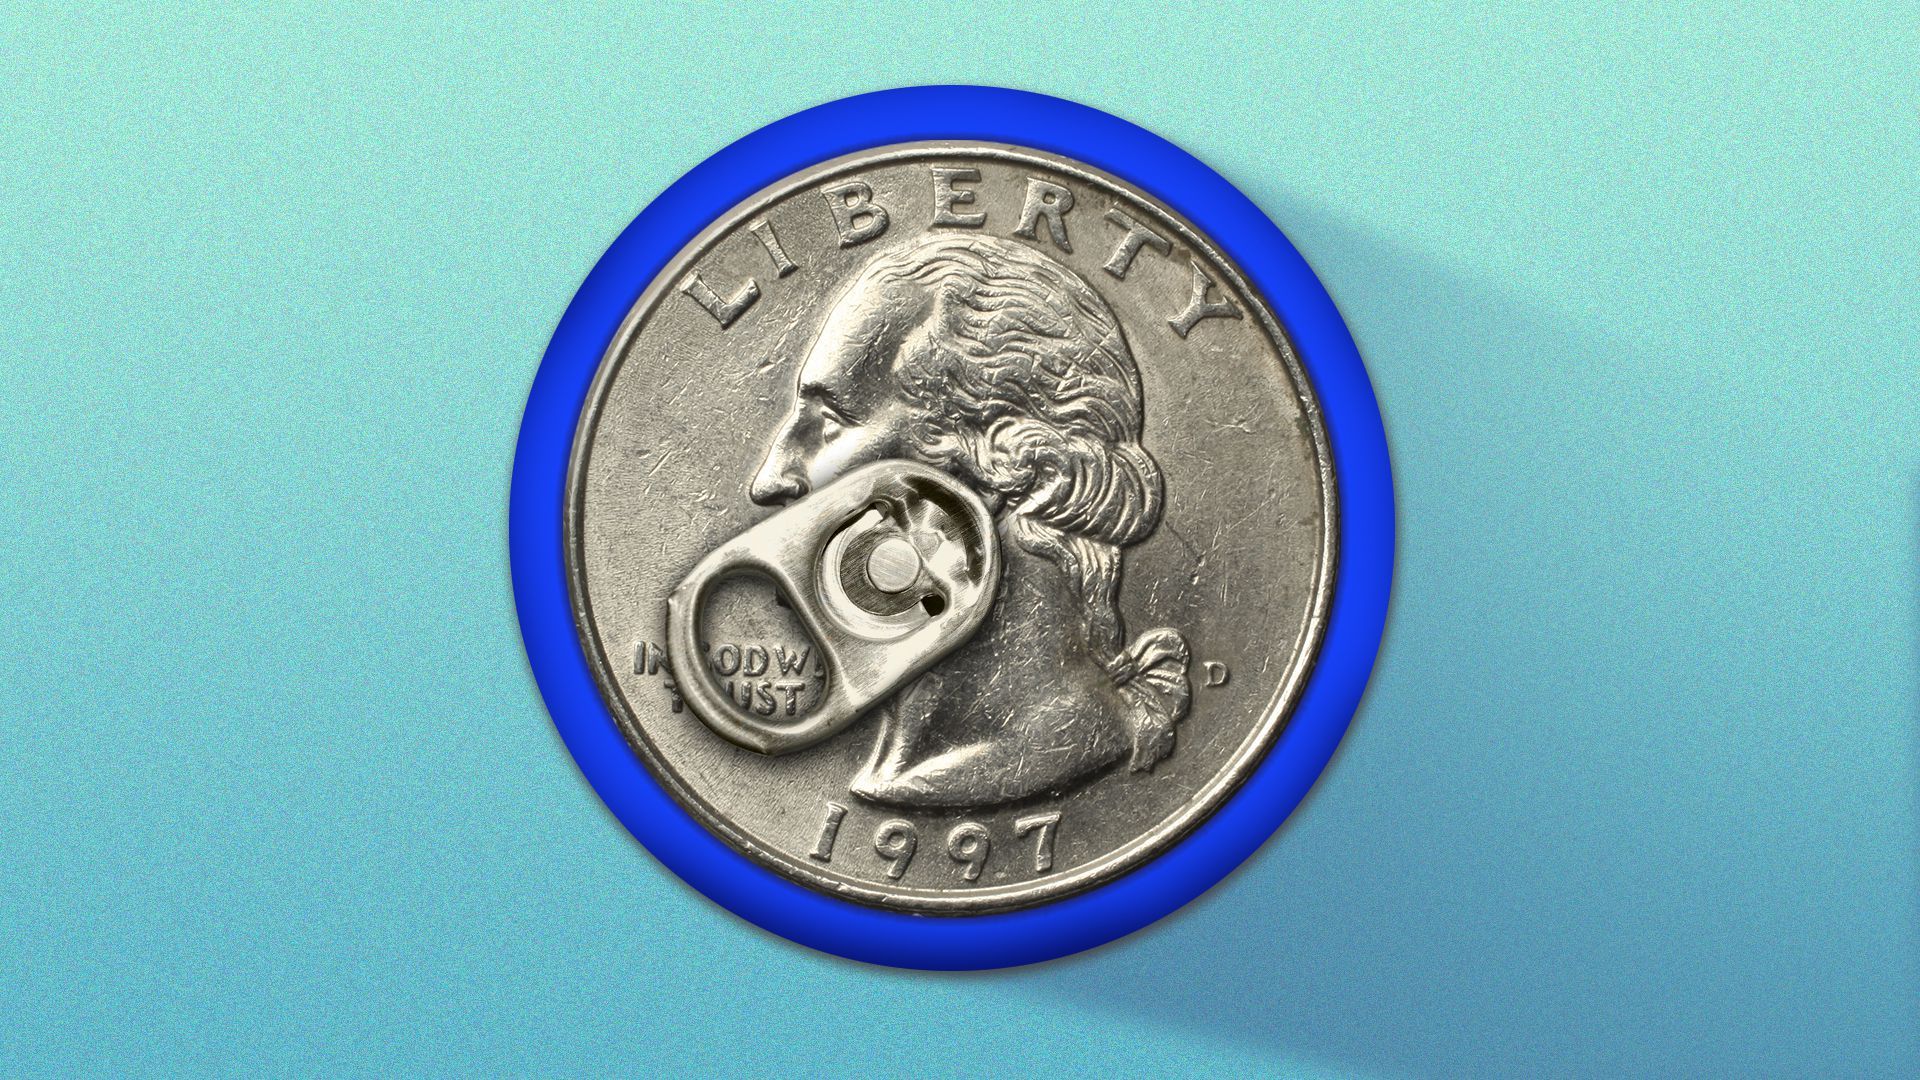 Illustration of a soda can with a quarter as the top.